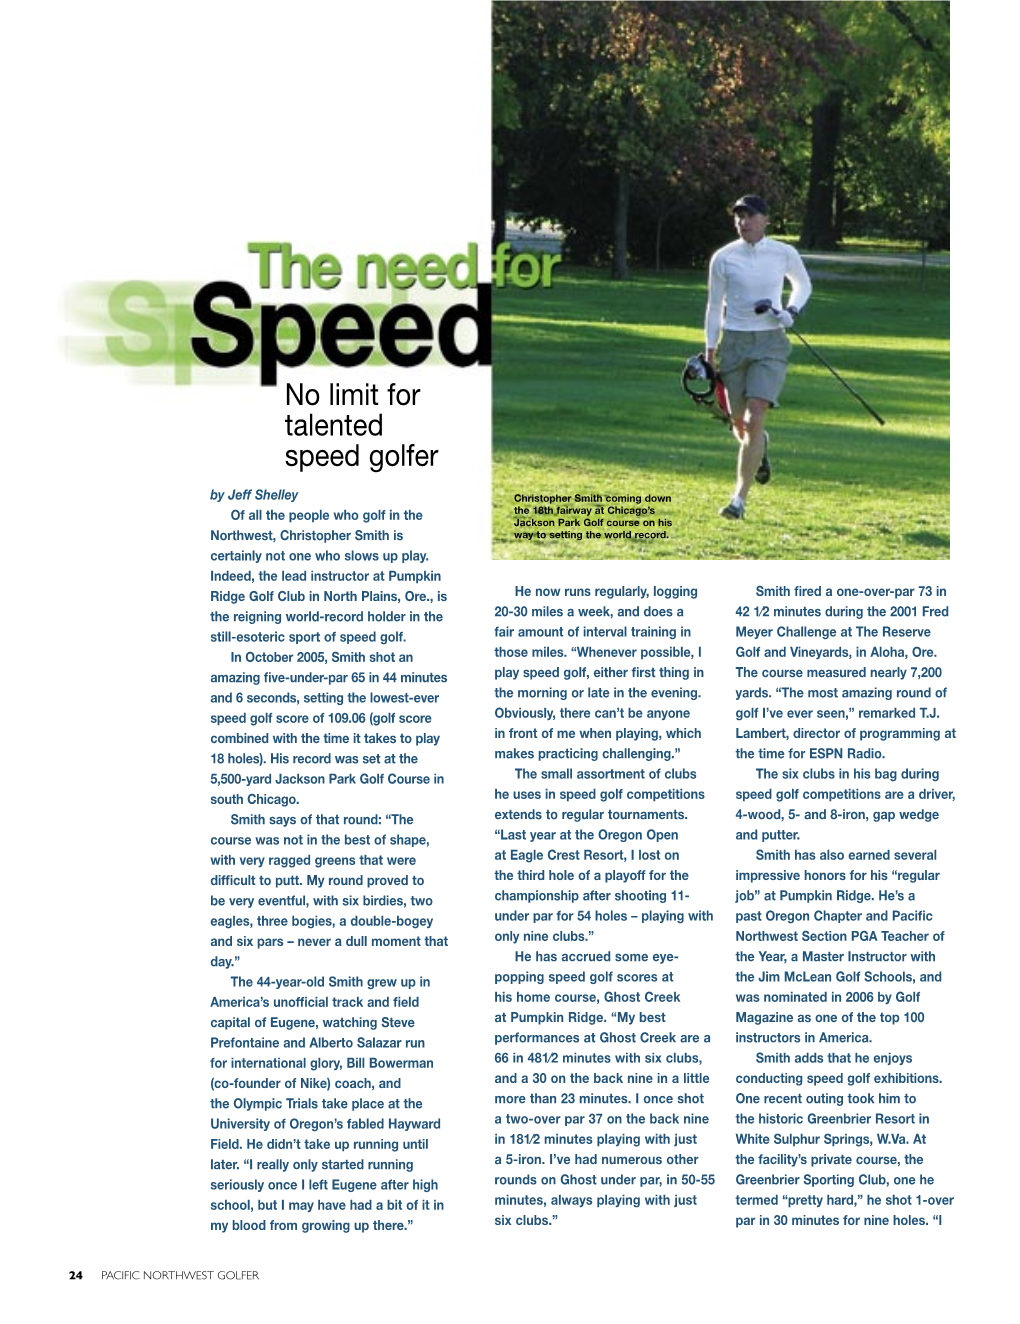 No Limit for Talented Speed Golfer